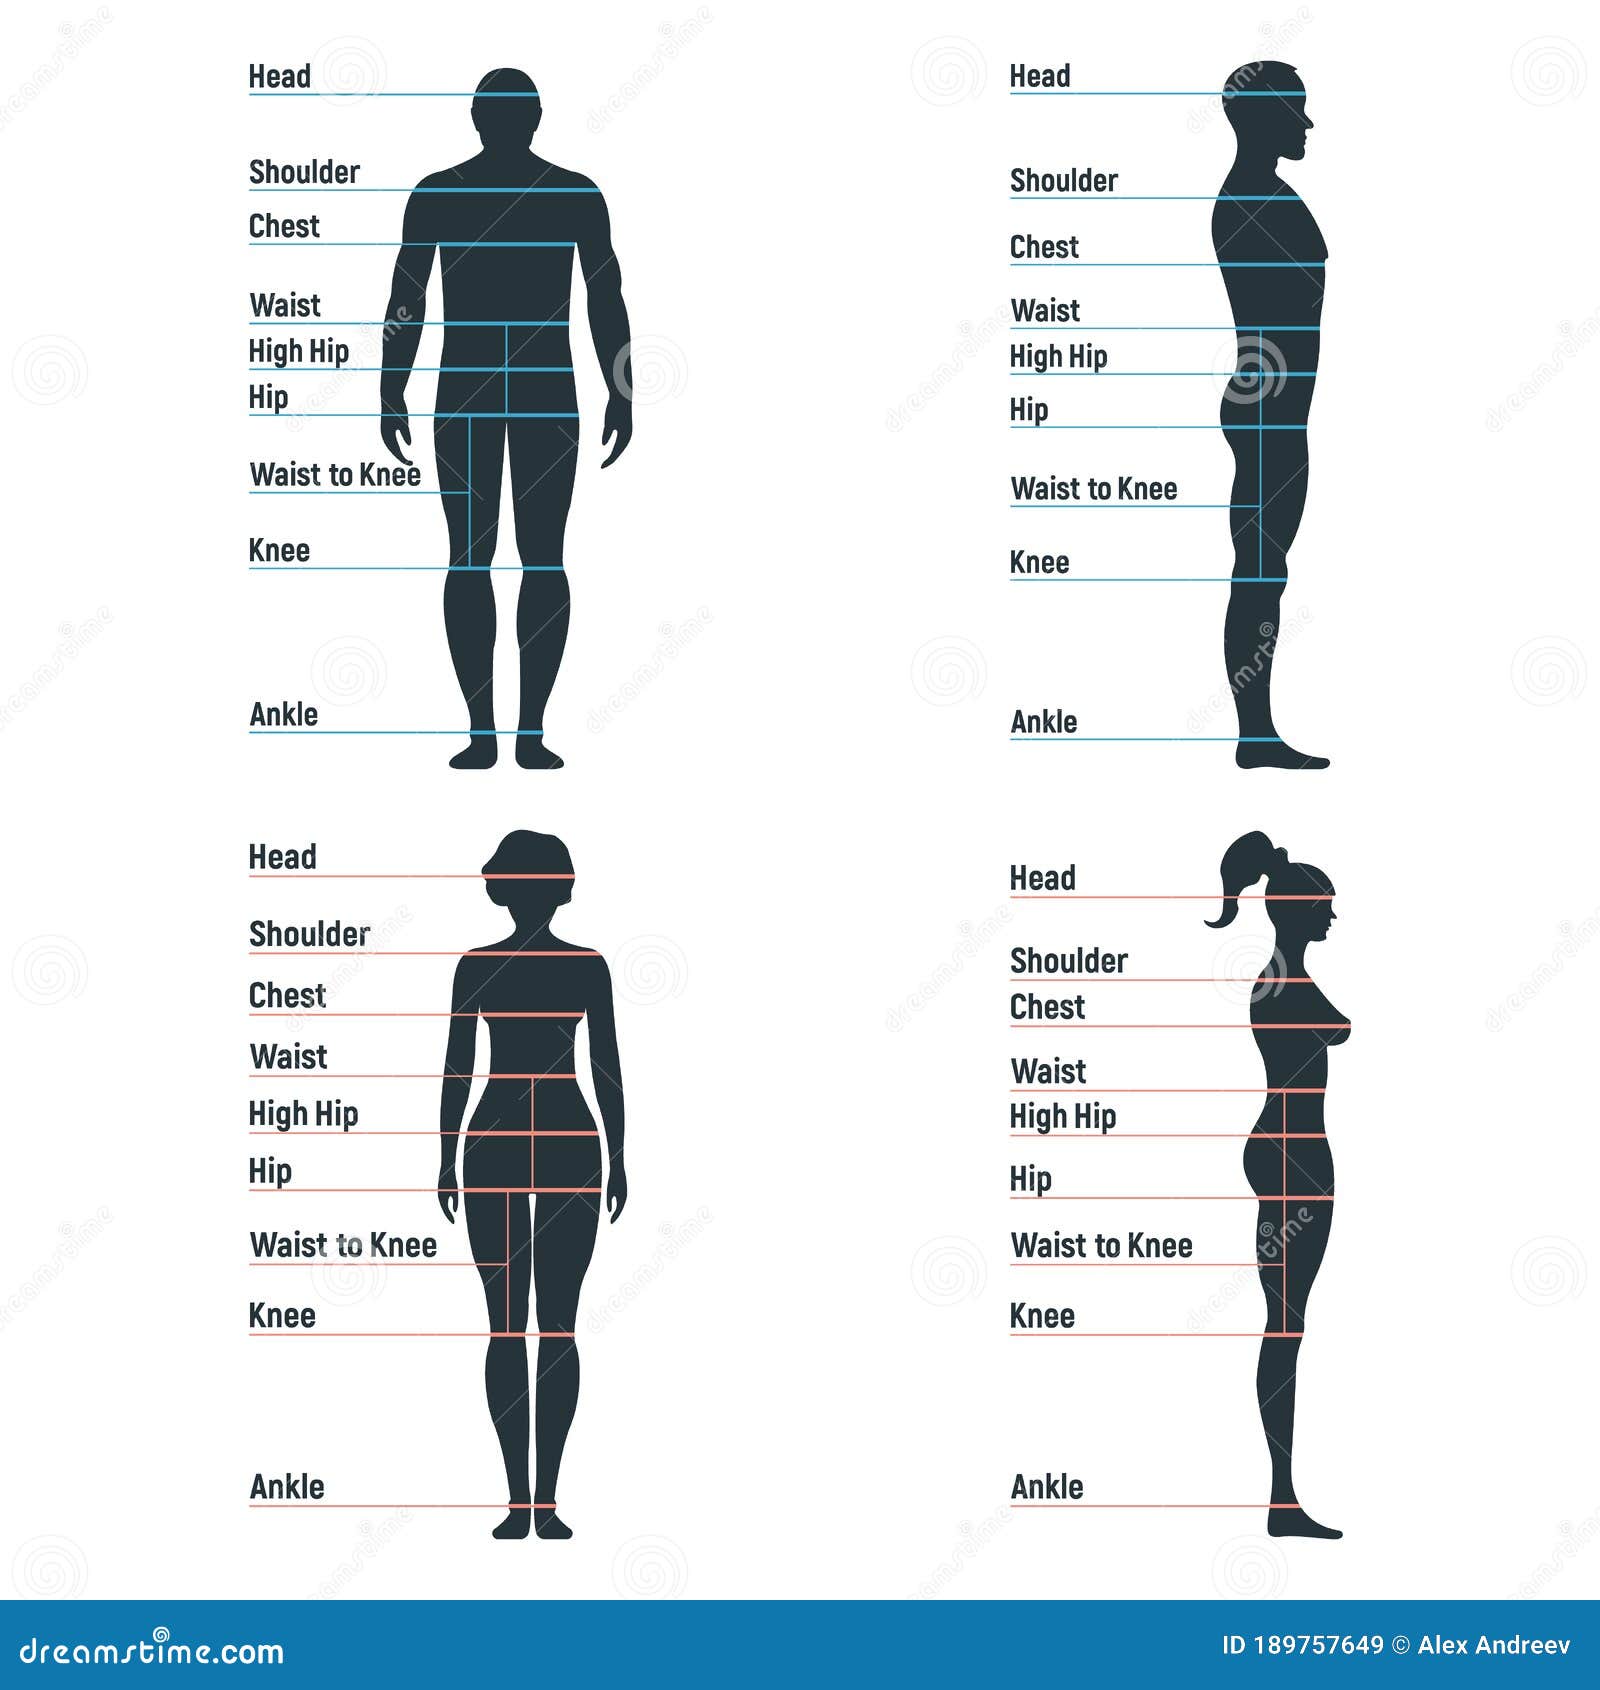 https://thumbs.dreamstime.com/z/male-female-size-chart-anatomy-human-character-people-dummy-front-view-side-body-silhouette-isolated-white-flat-vector-189757649.jpg